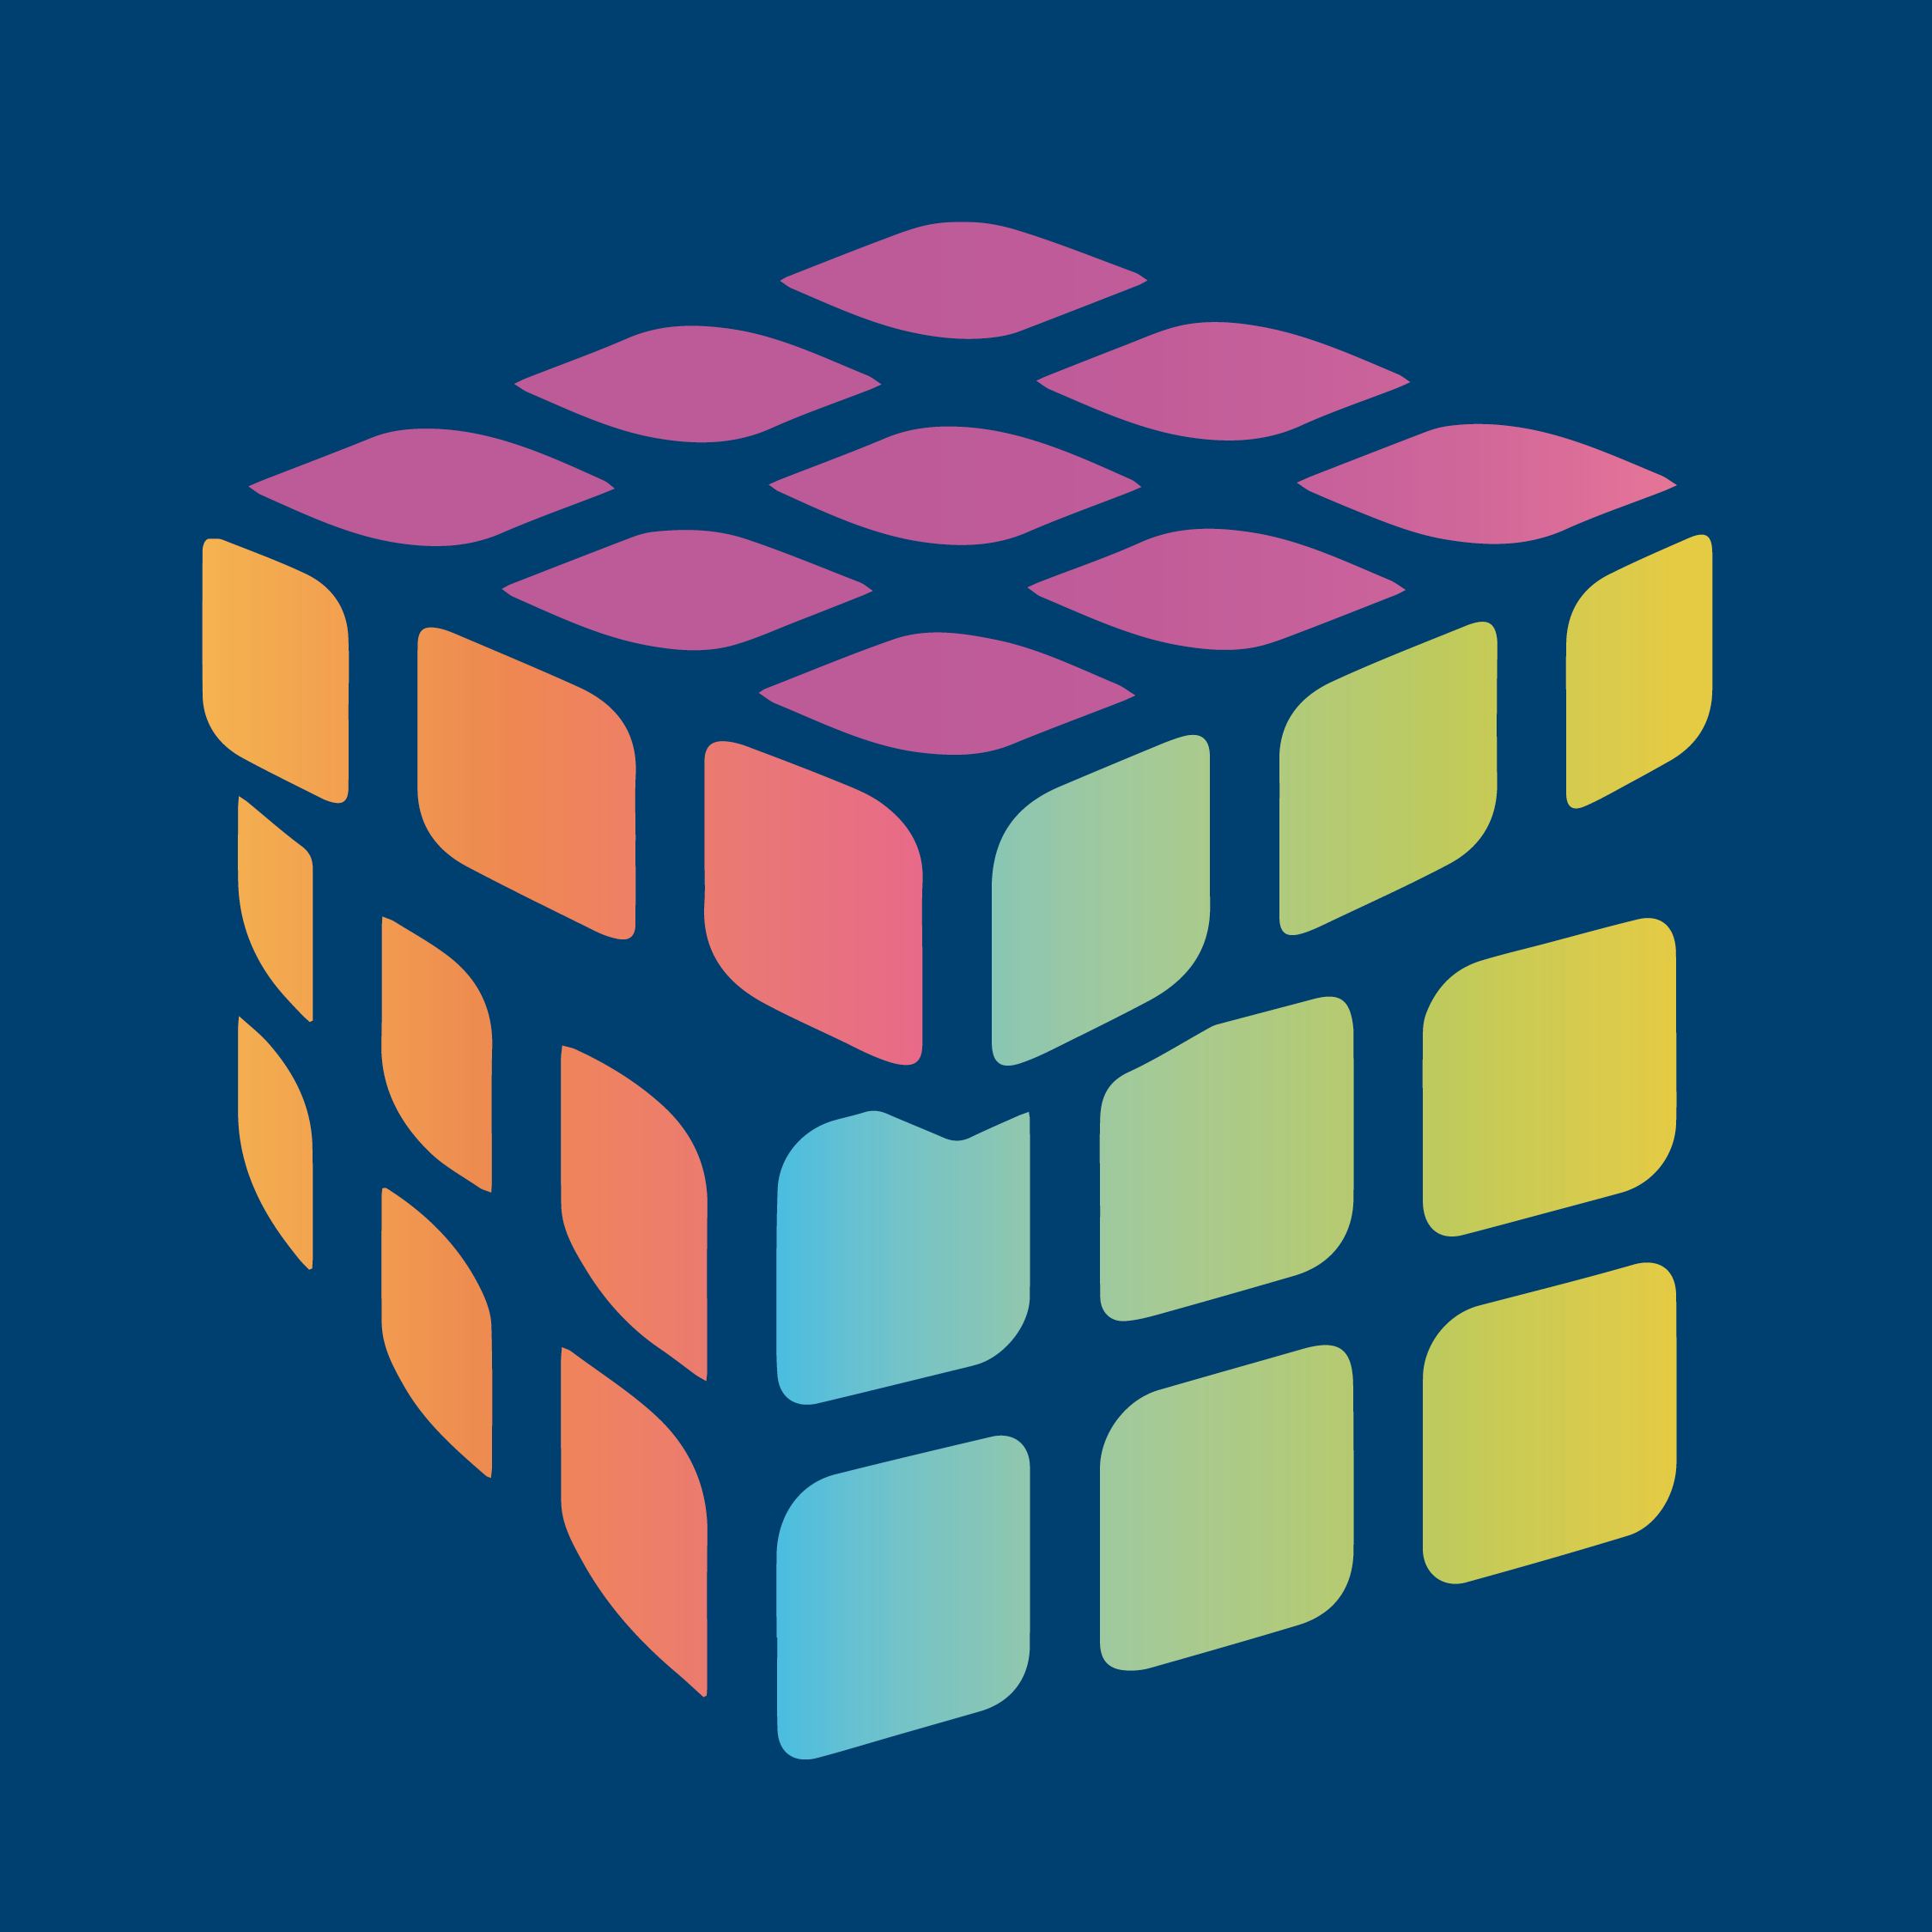 Rubic cube picture on a blue background